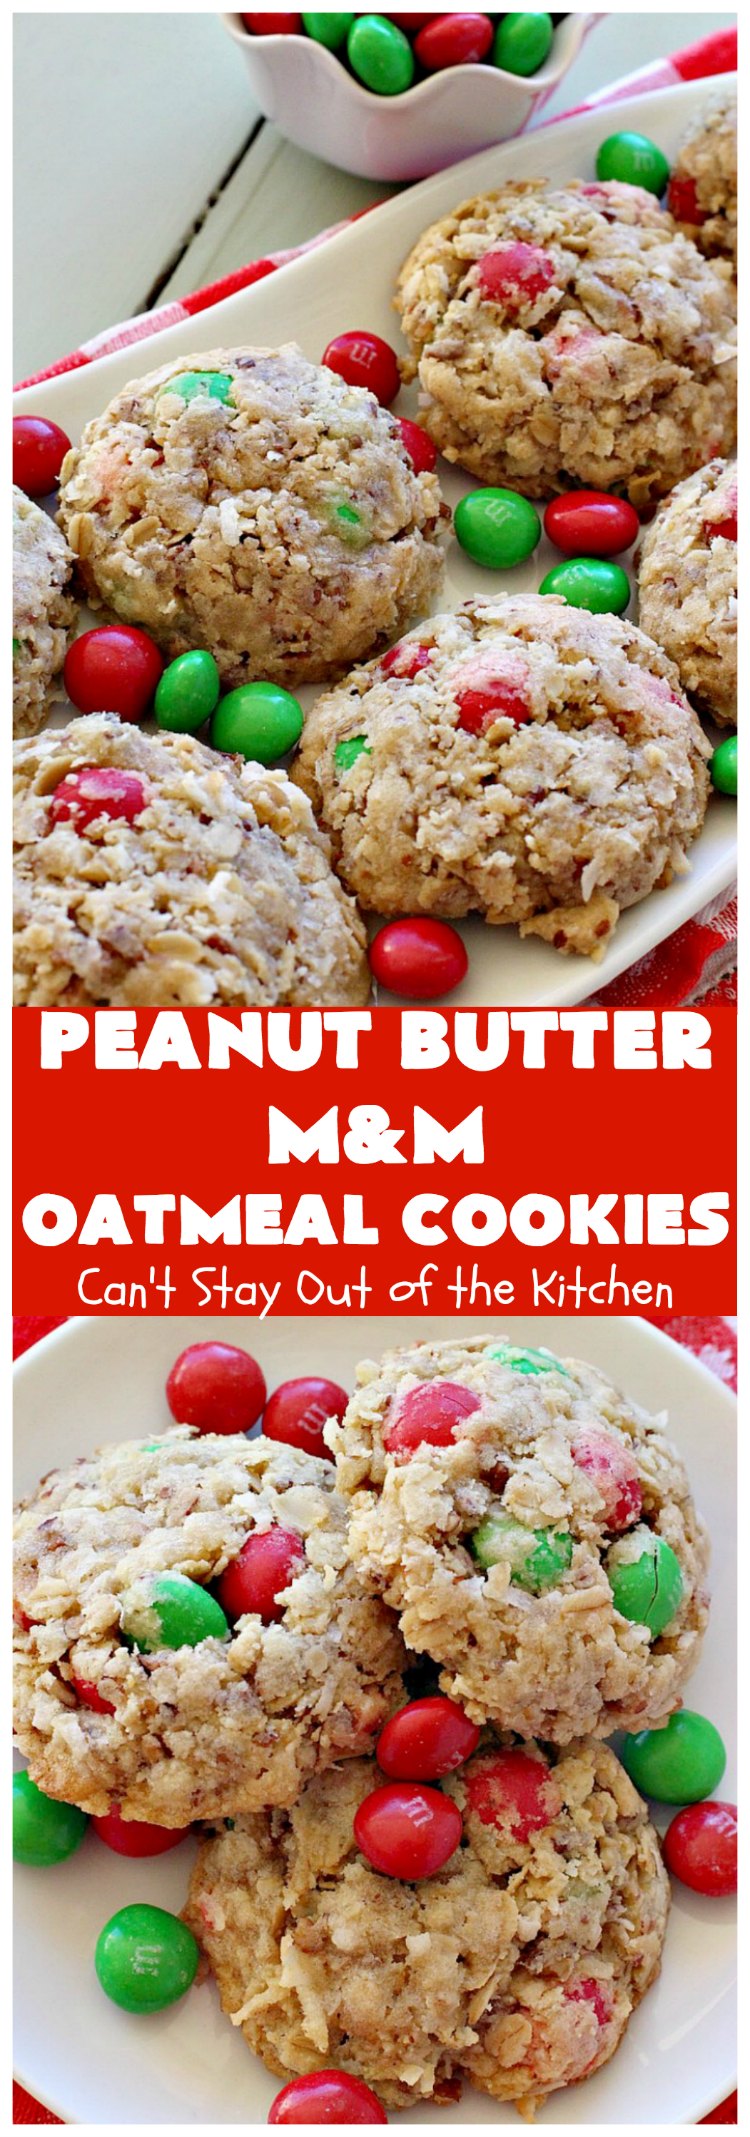 Peanut Butter M&M Oatmeal Cookies – Can't Stay Out of the Kitchen